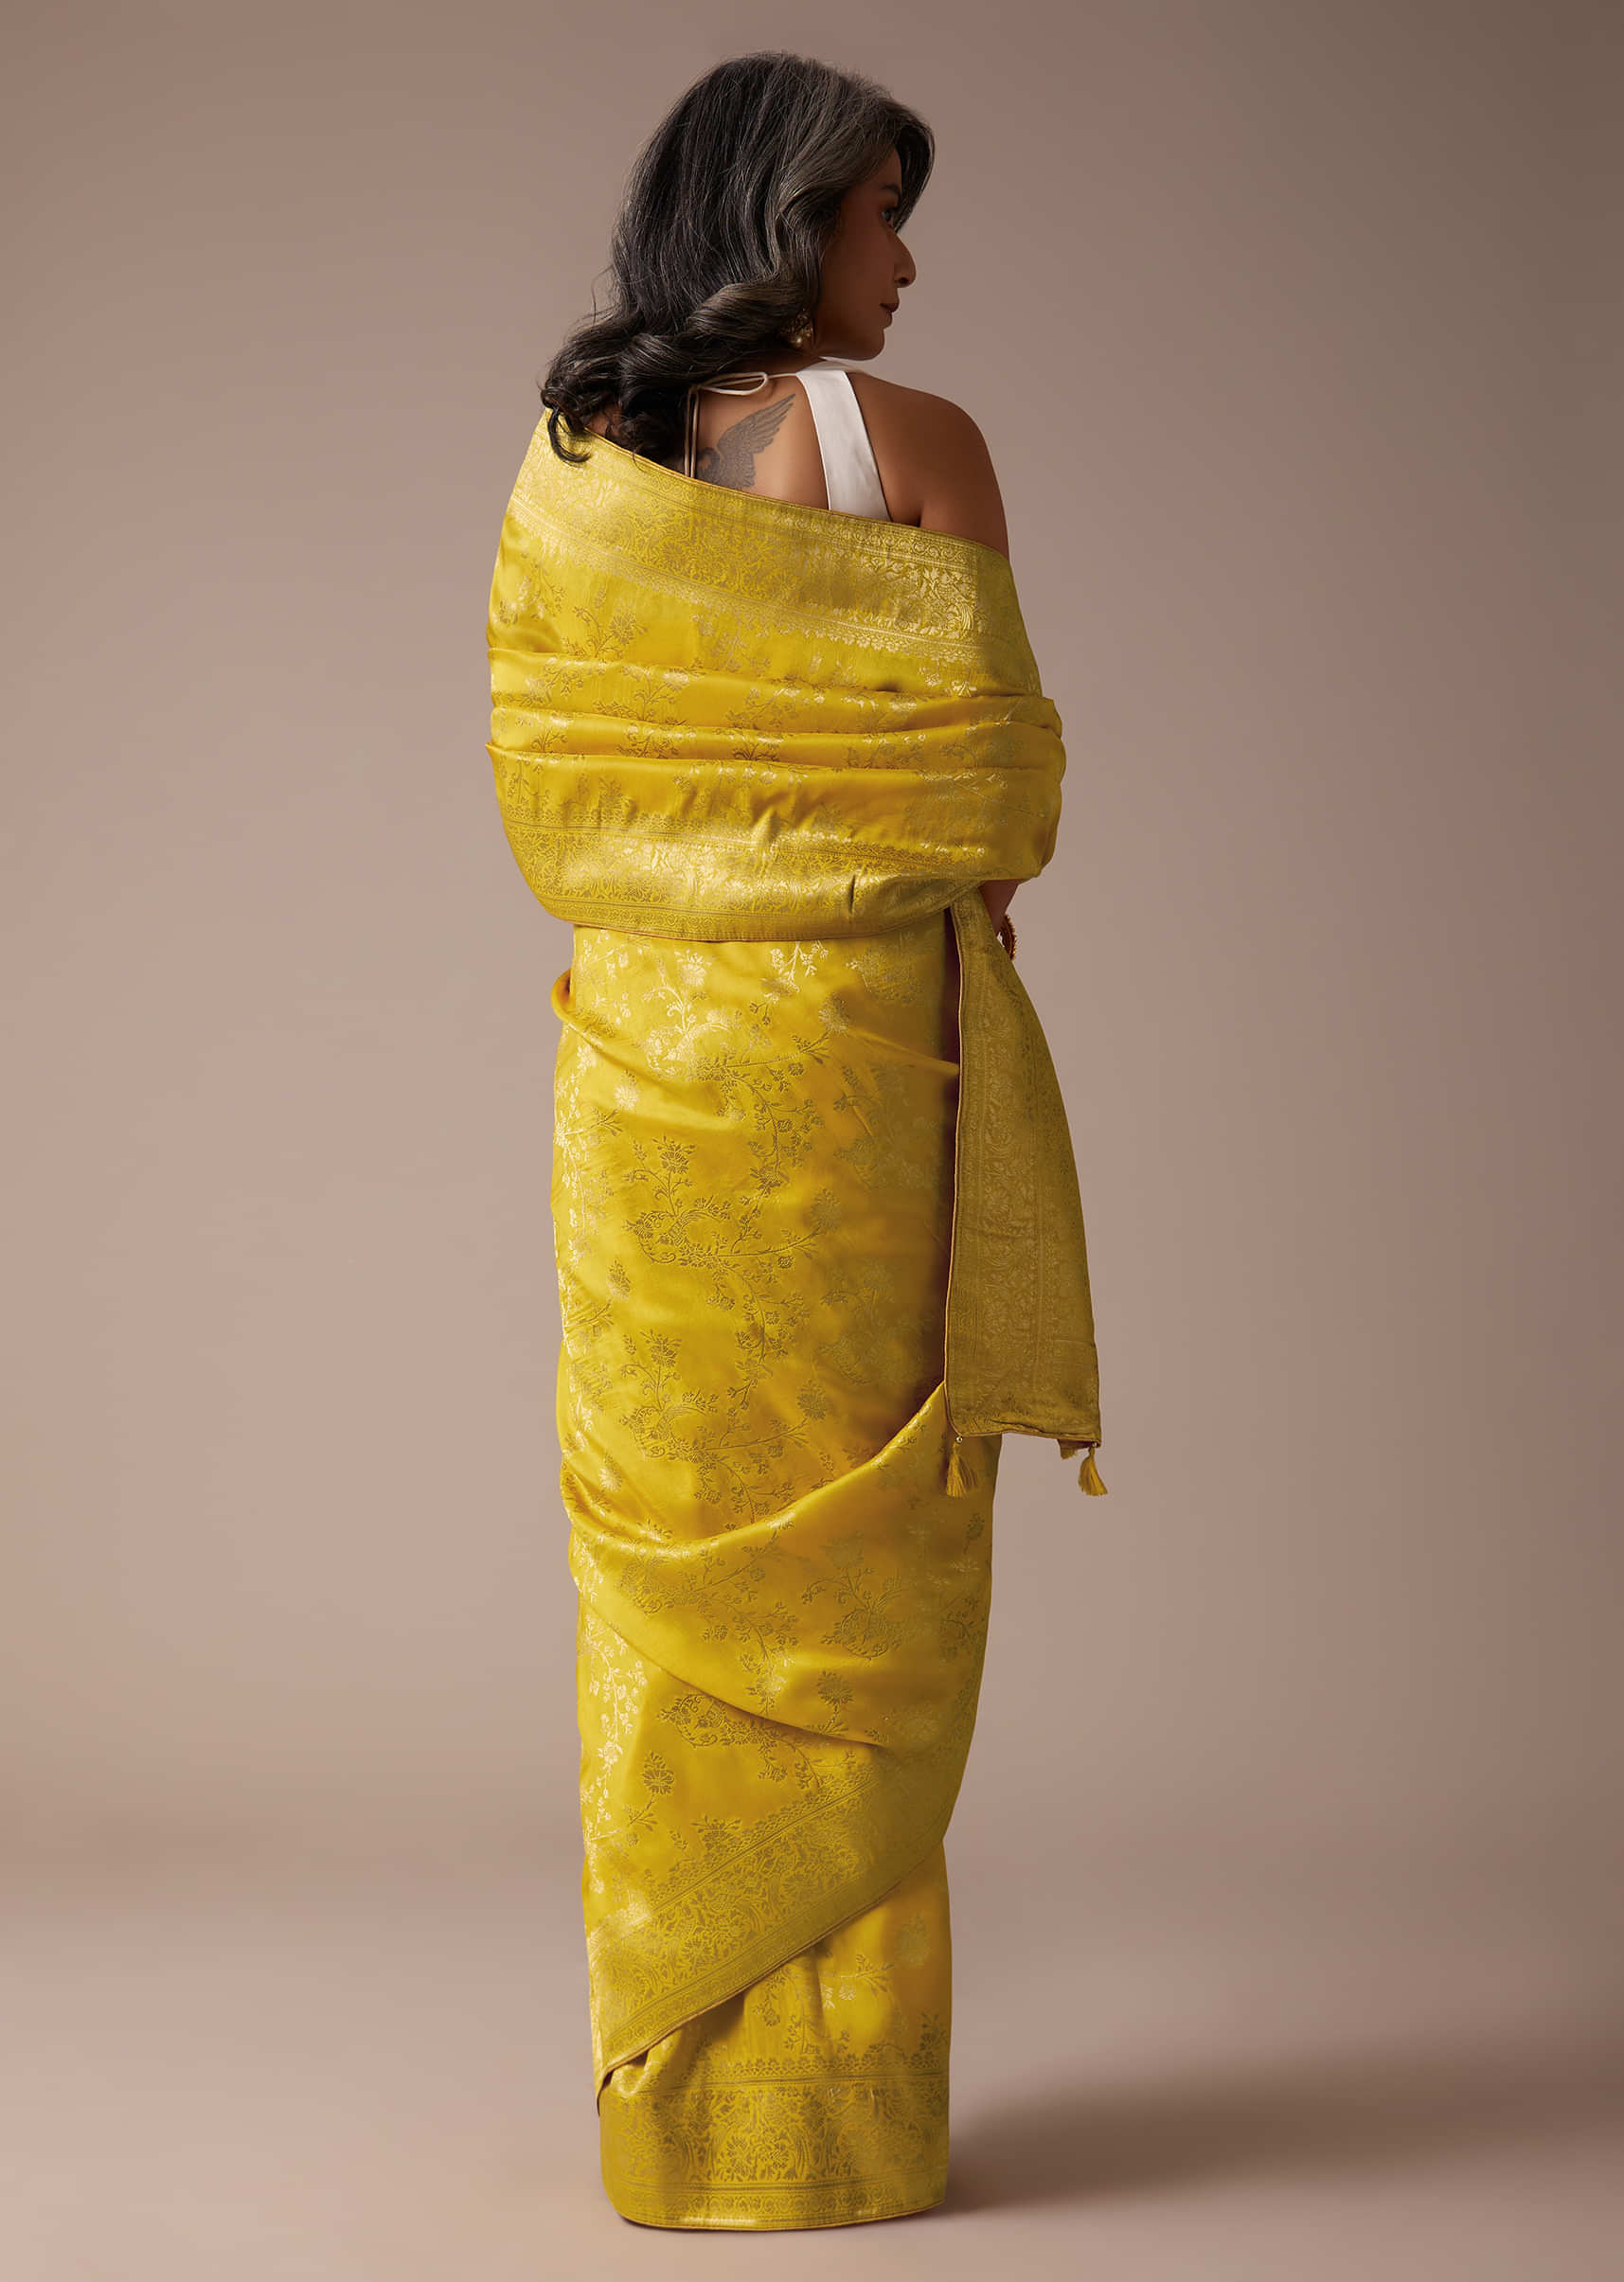 Mustard Yellow Saree In Dola Silk With Woven Floral Jaal And Moroccan Weave On Pallu